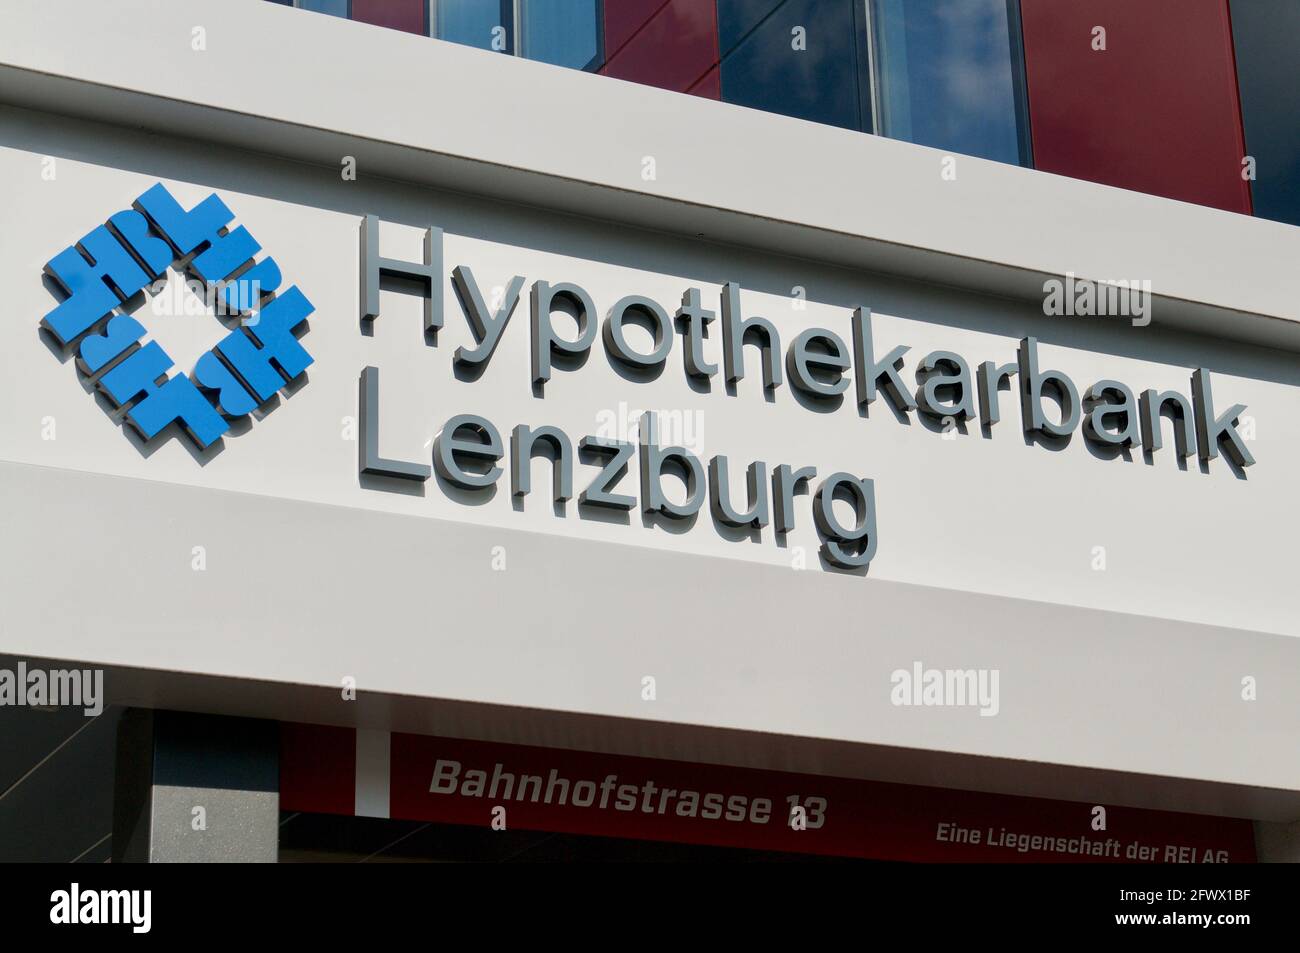 Wohlen, Aargau, Switzerland - 15th April 2021 : HBL Hypothekarbank Lenzburg Bank sign hanging at the building in Wohlen, Switzerland. HBL is one of th Stock Photo